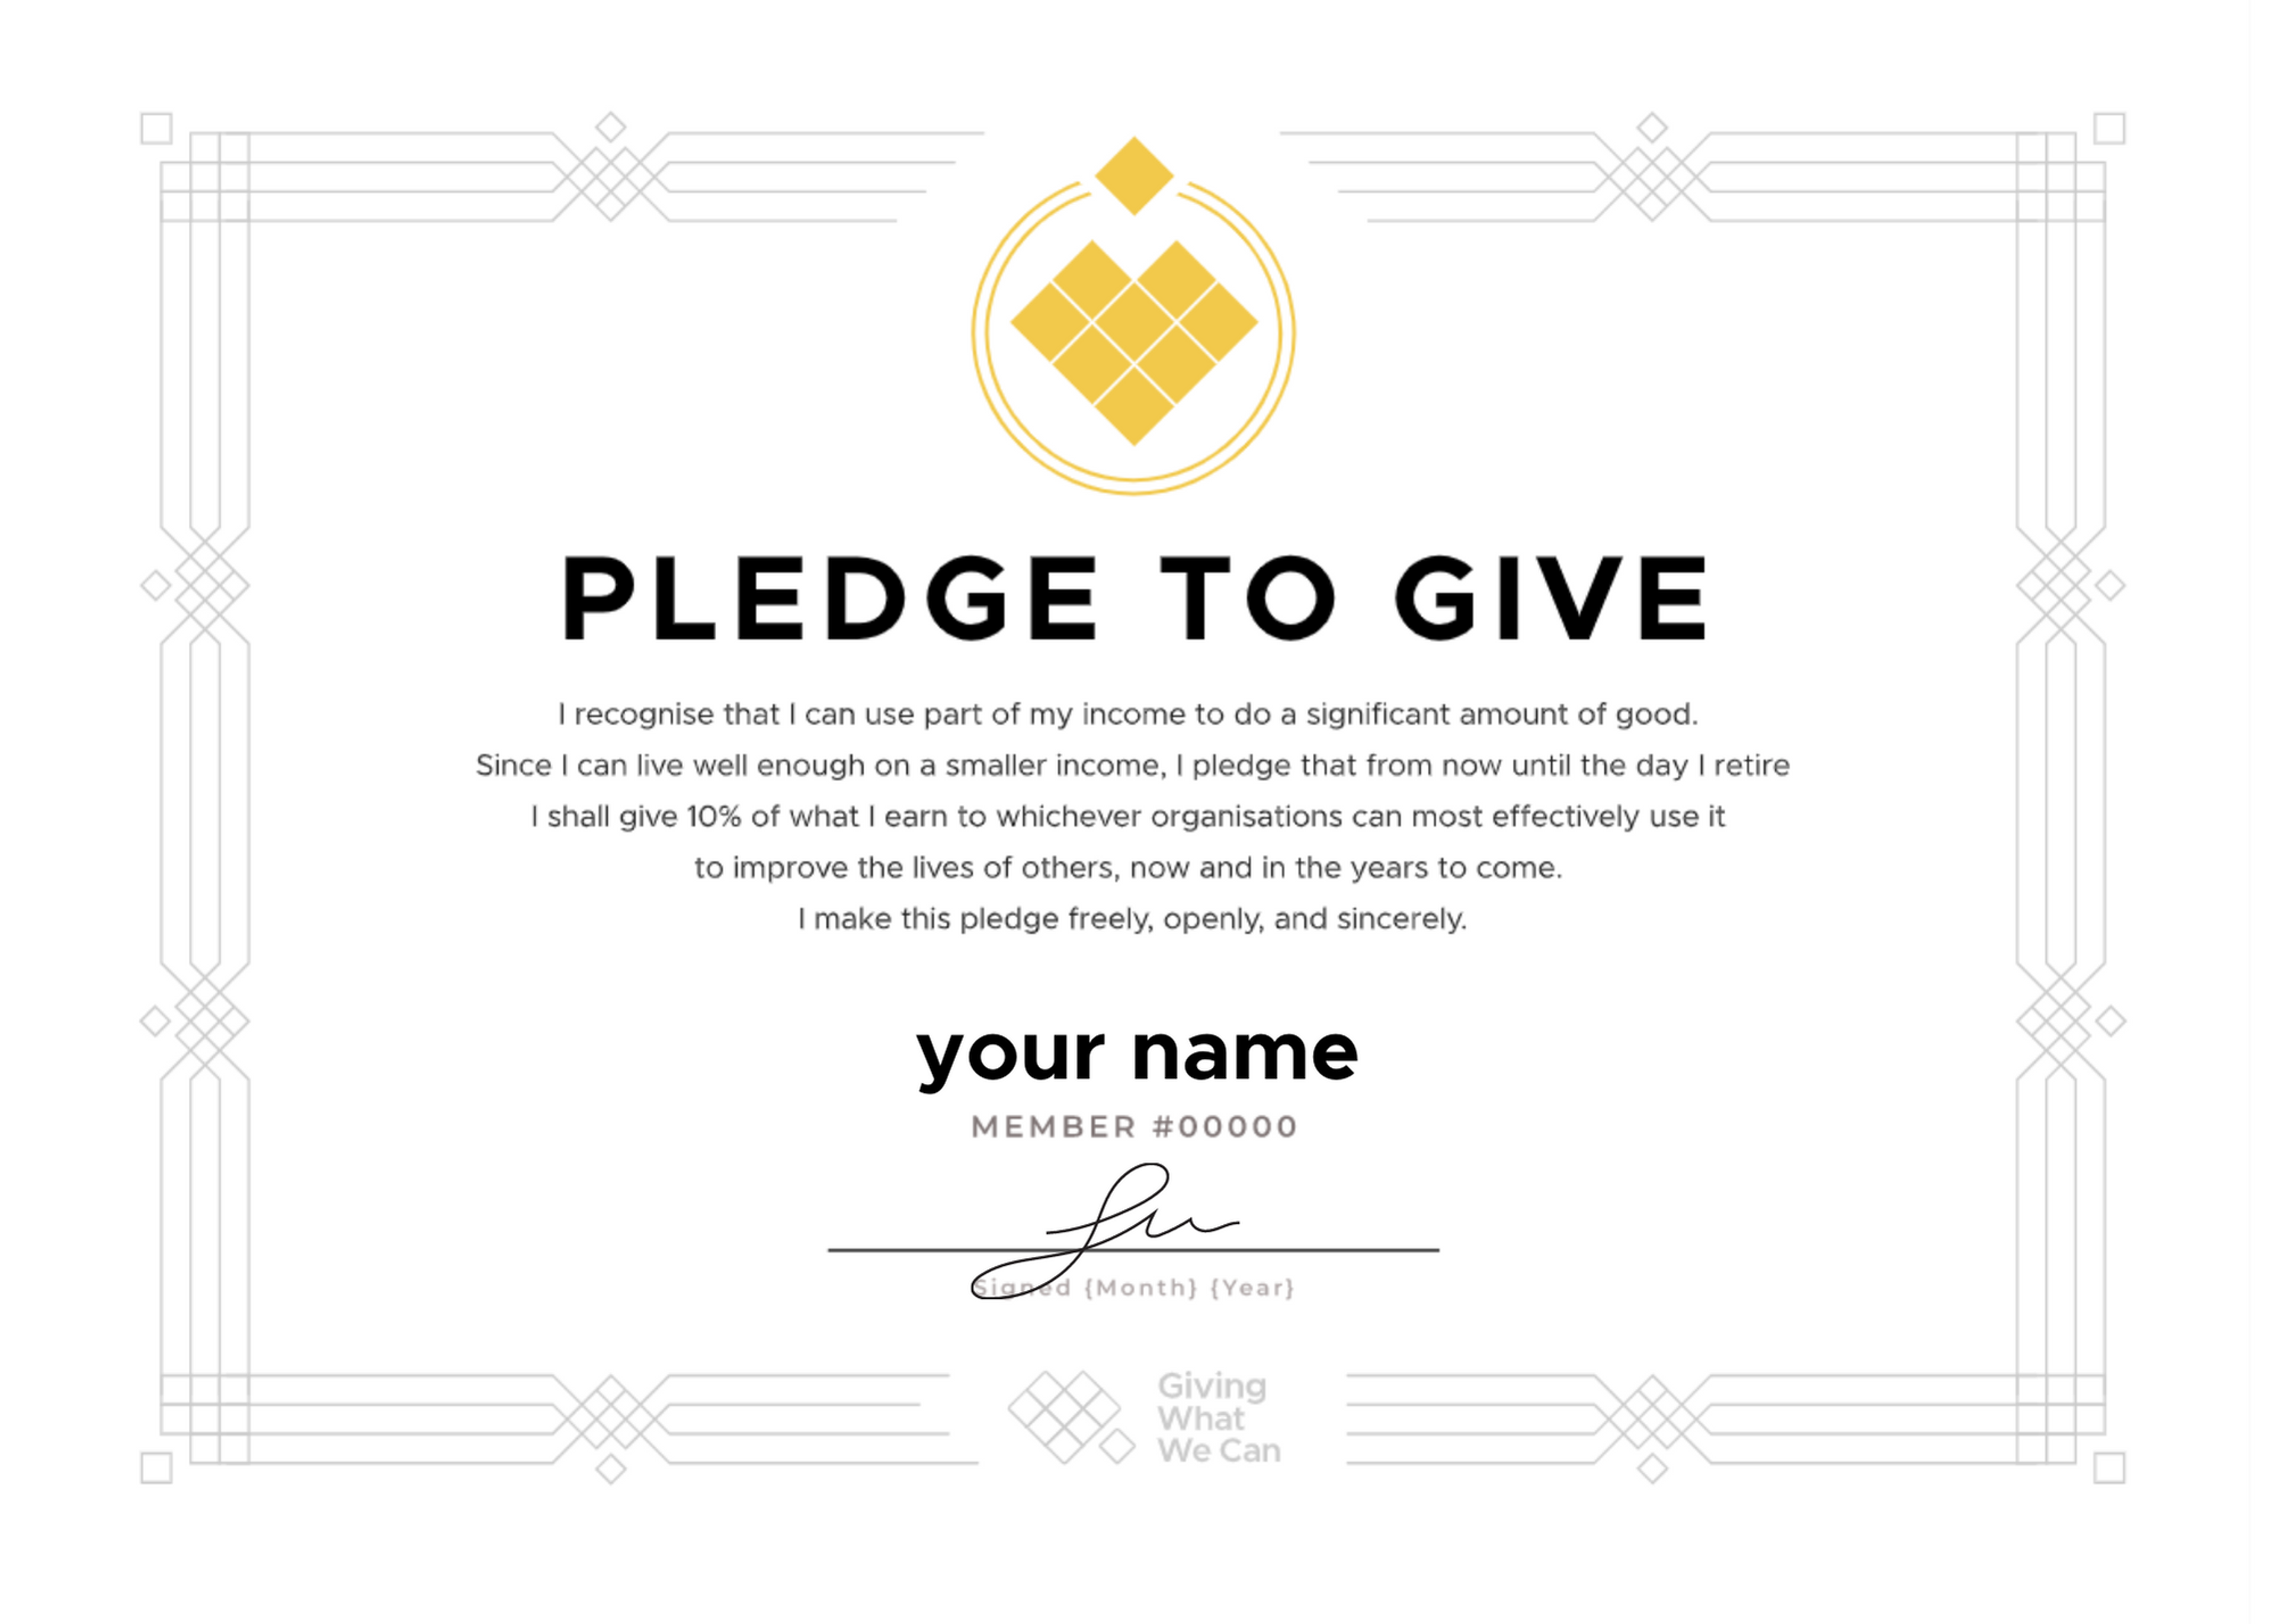 Our pledge · Giving What We Can